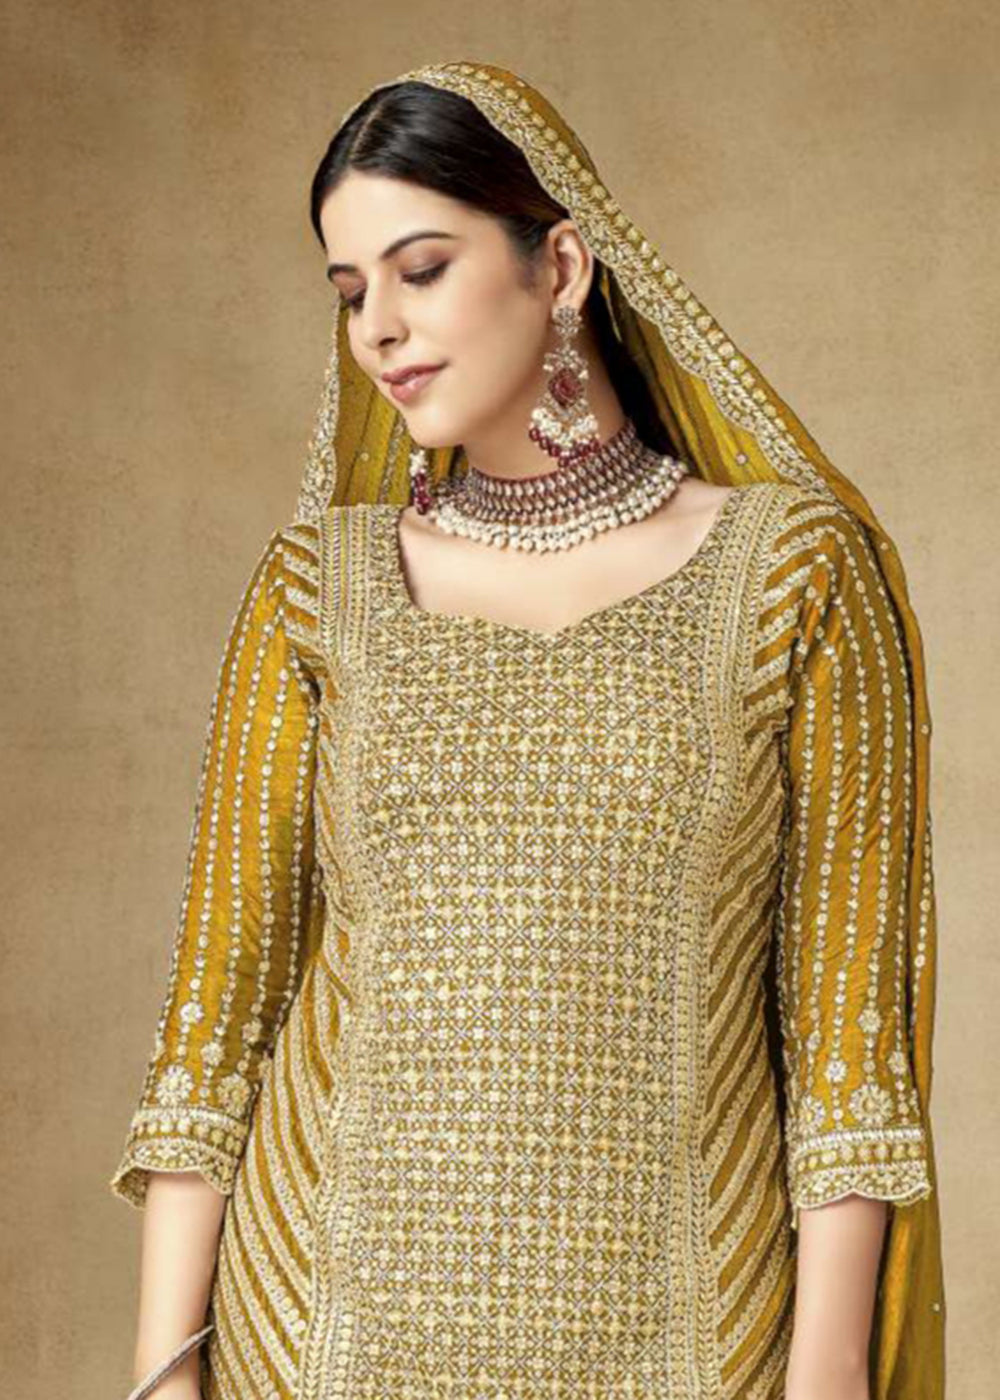 Shop Now Alluring Yellow Zari & Sequins Embroidered Gharara Suit Online at Empress Clothing in USA, UK, Canada, Italy & Worldwide. 